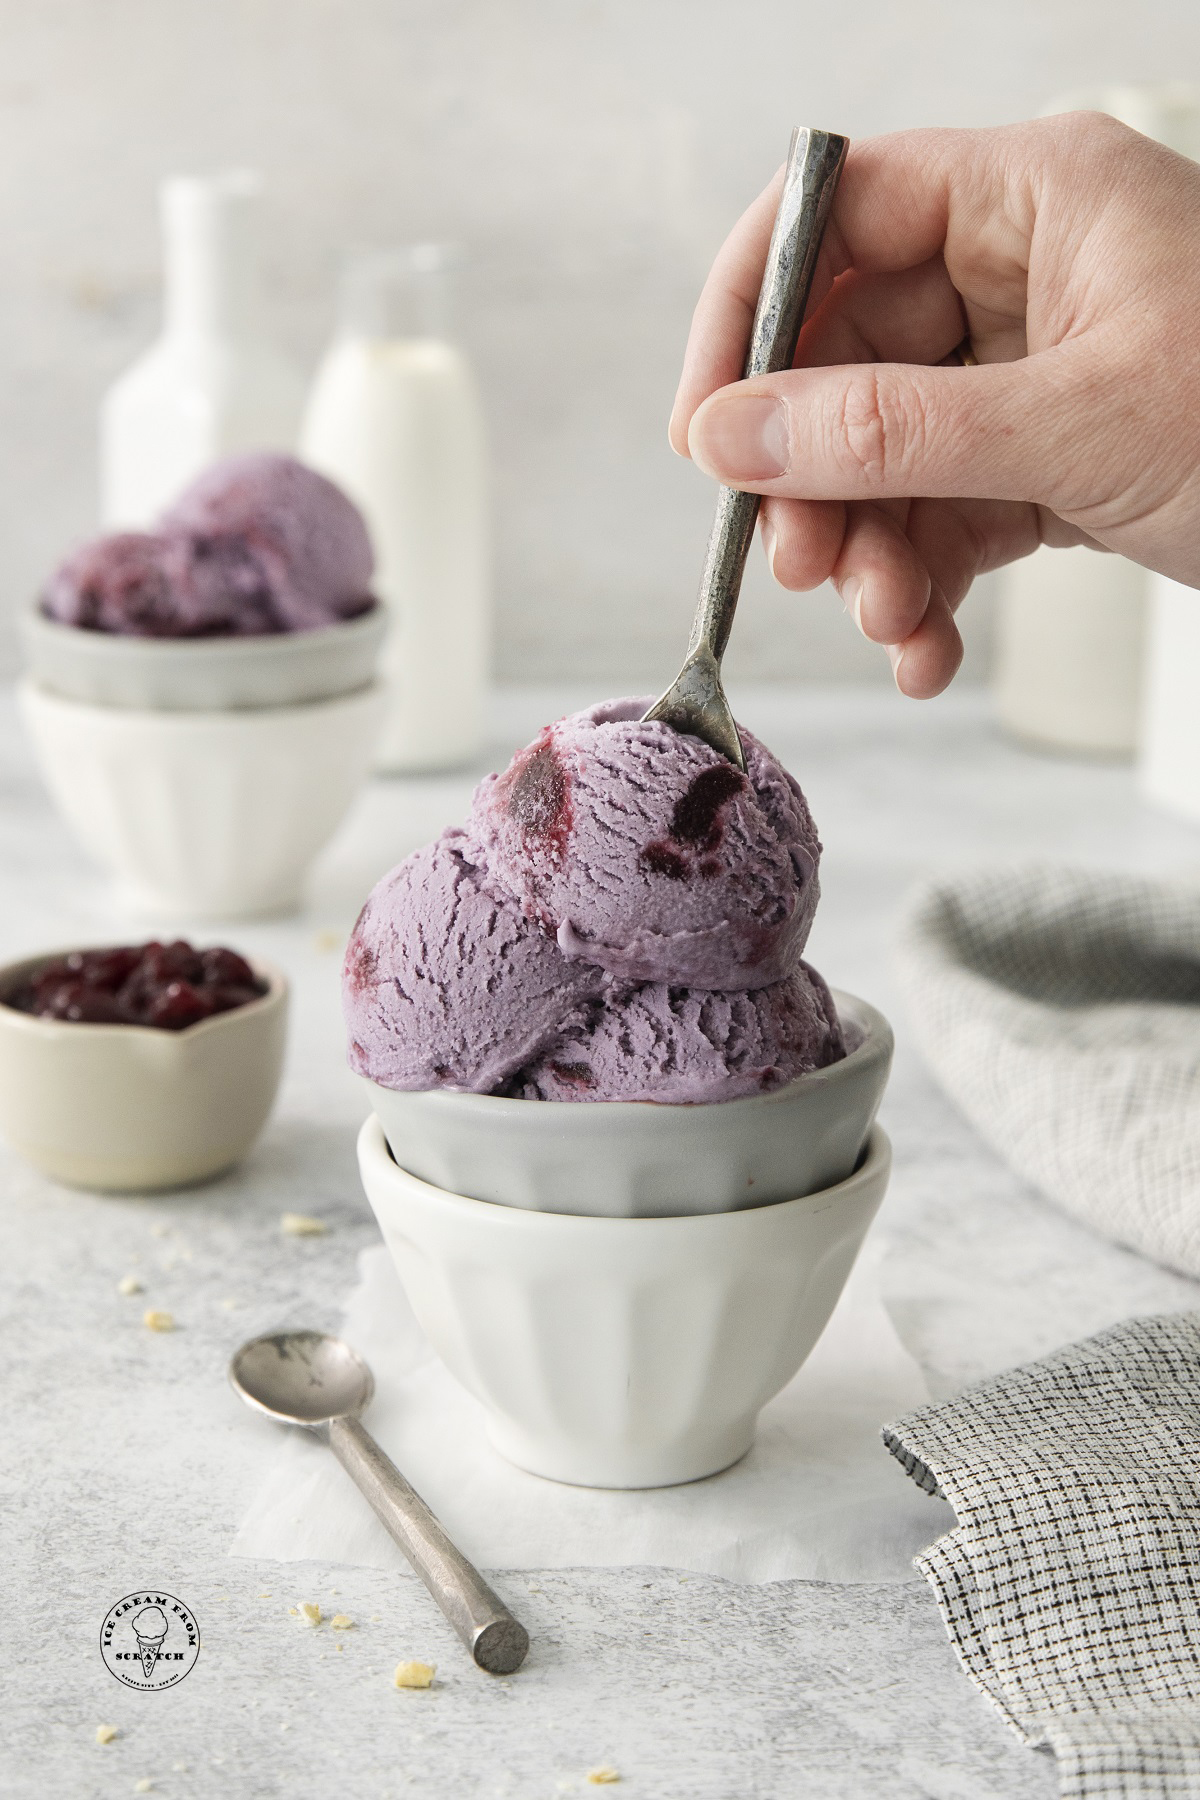 a bowl filled with scoops of grape ice cream. a hand is eating it with a small spoon